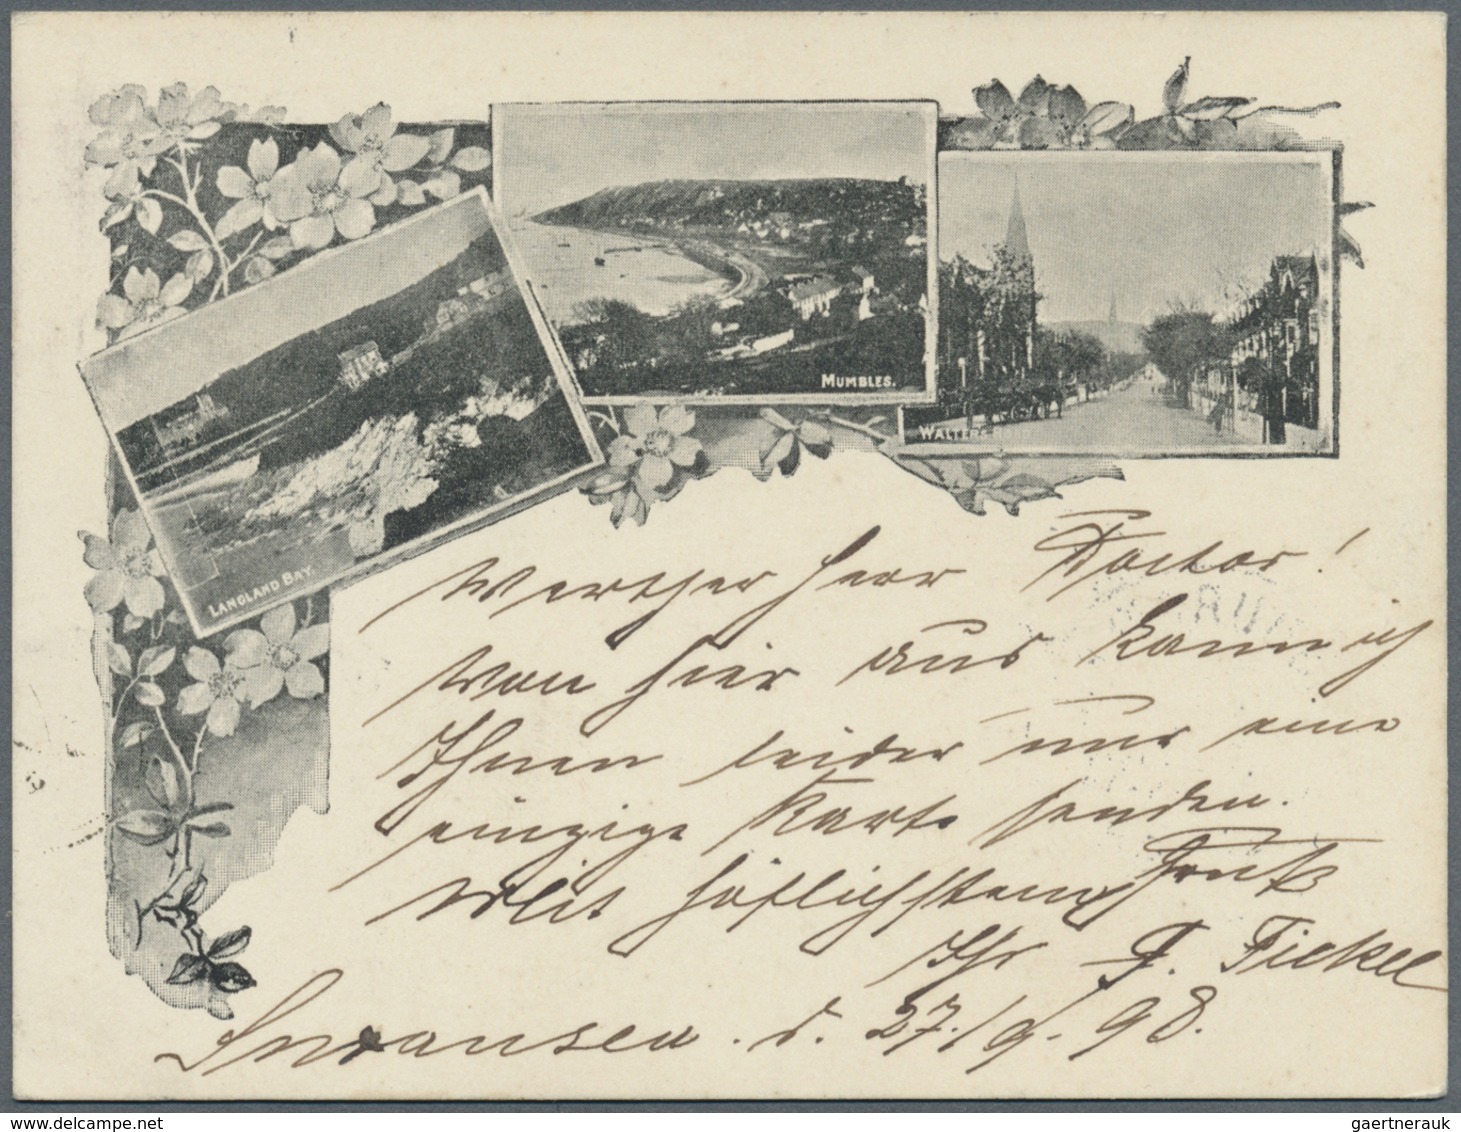 Großbritannien: 1898/1955, 96 early picture postcards, many from 1898 in co called "small size" with